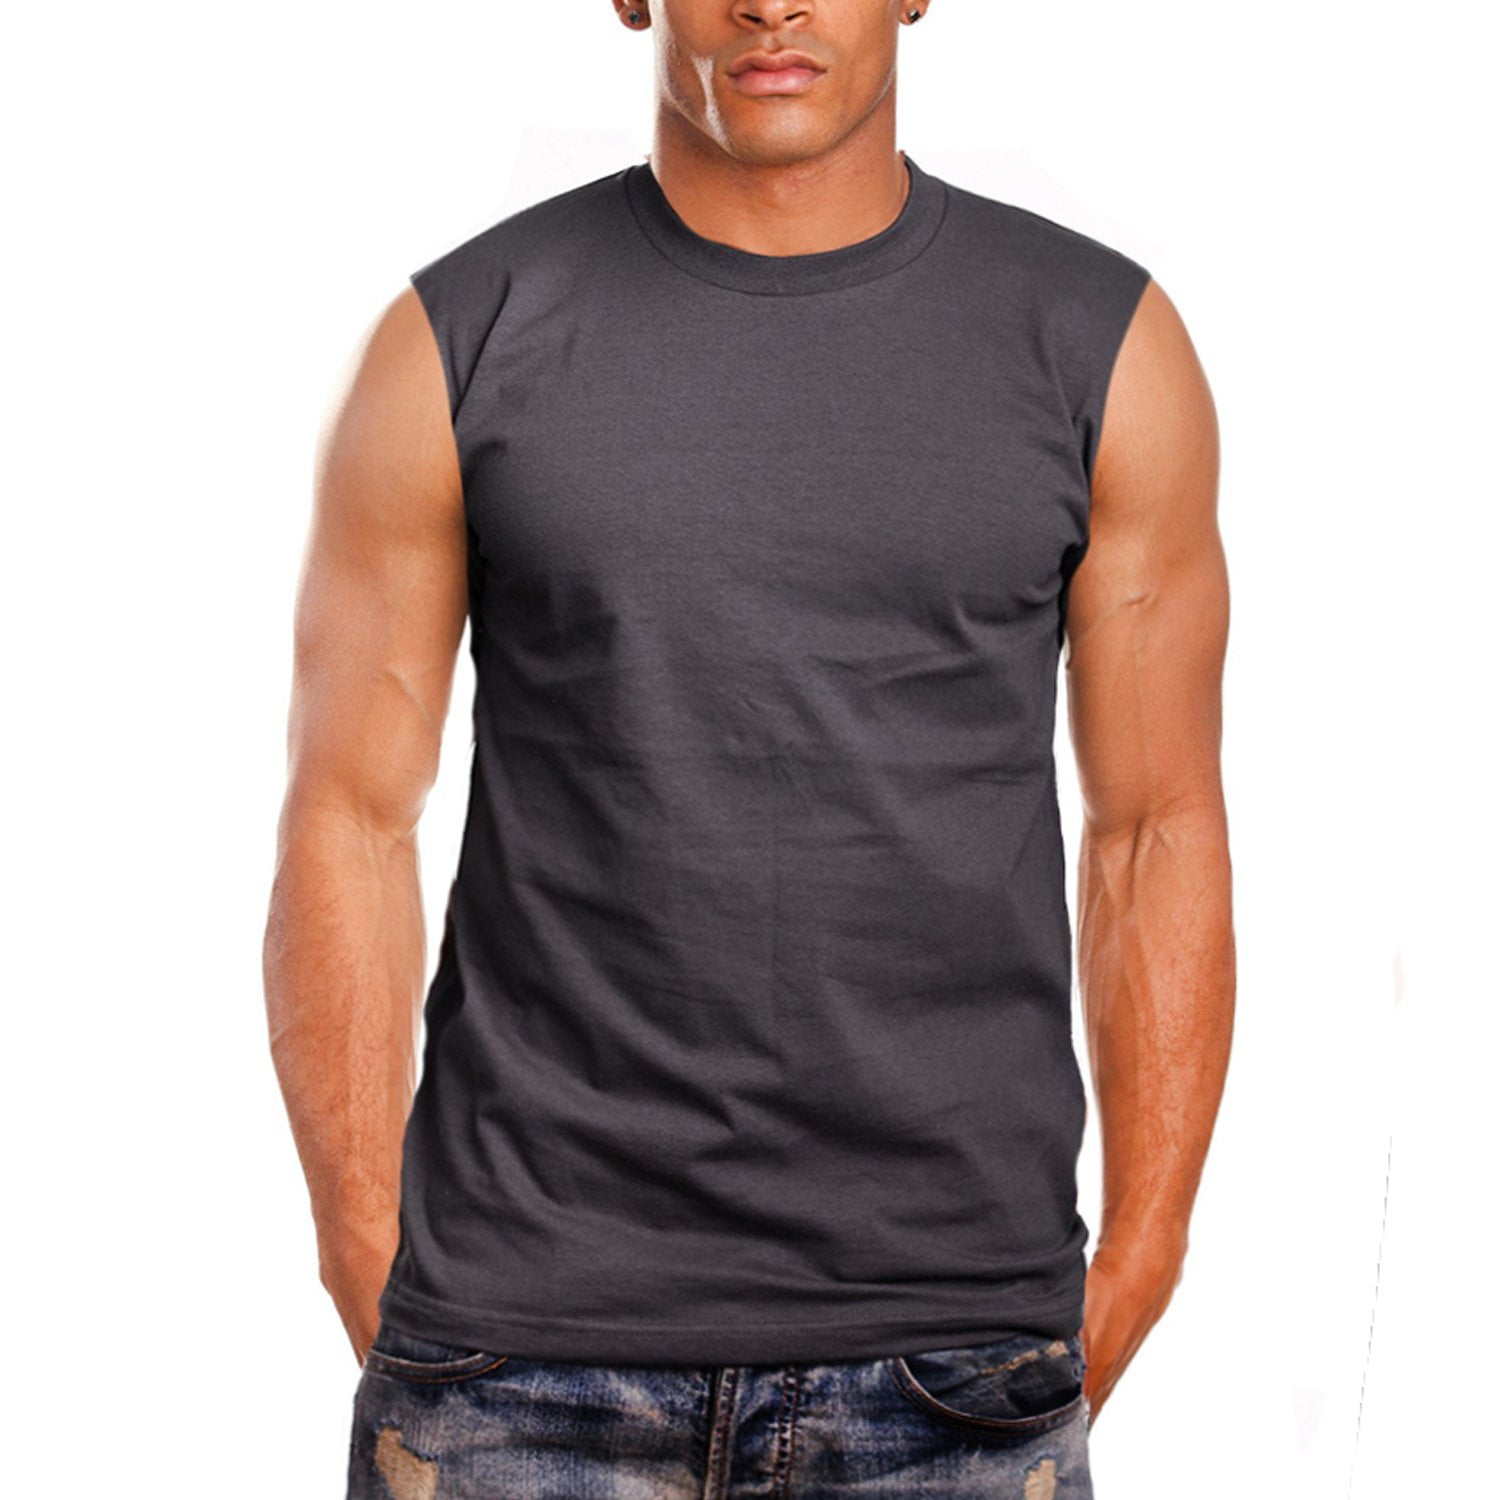 Mens Clothing T-shirts Sleeveless t-shirts Grey Amazon Essentials Tech Stretch Muscle Shirt in Black Heather for Men 